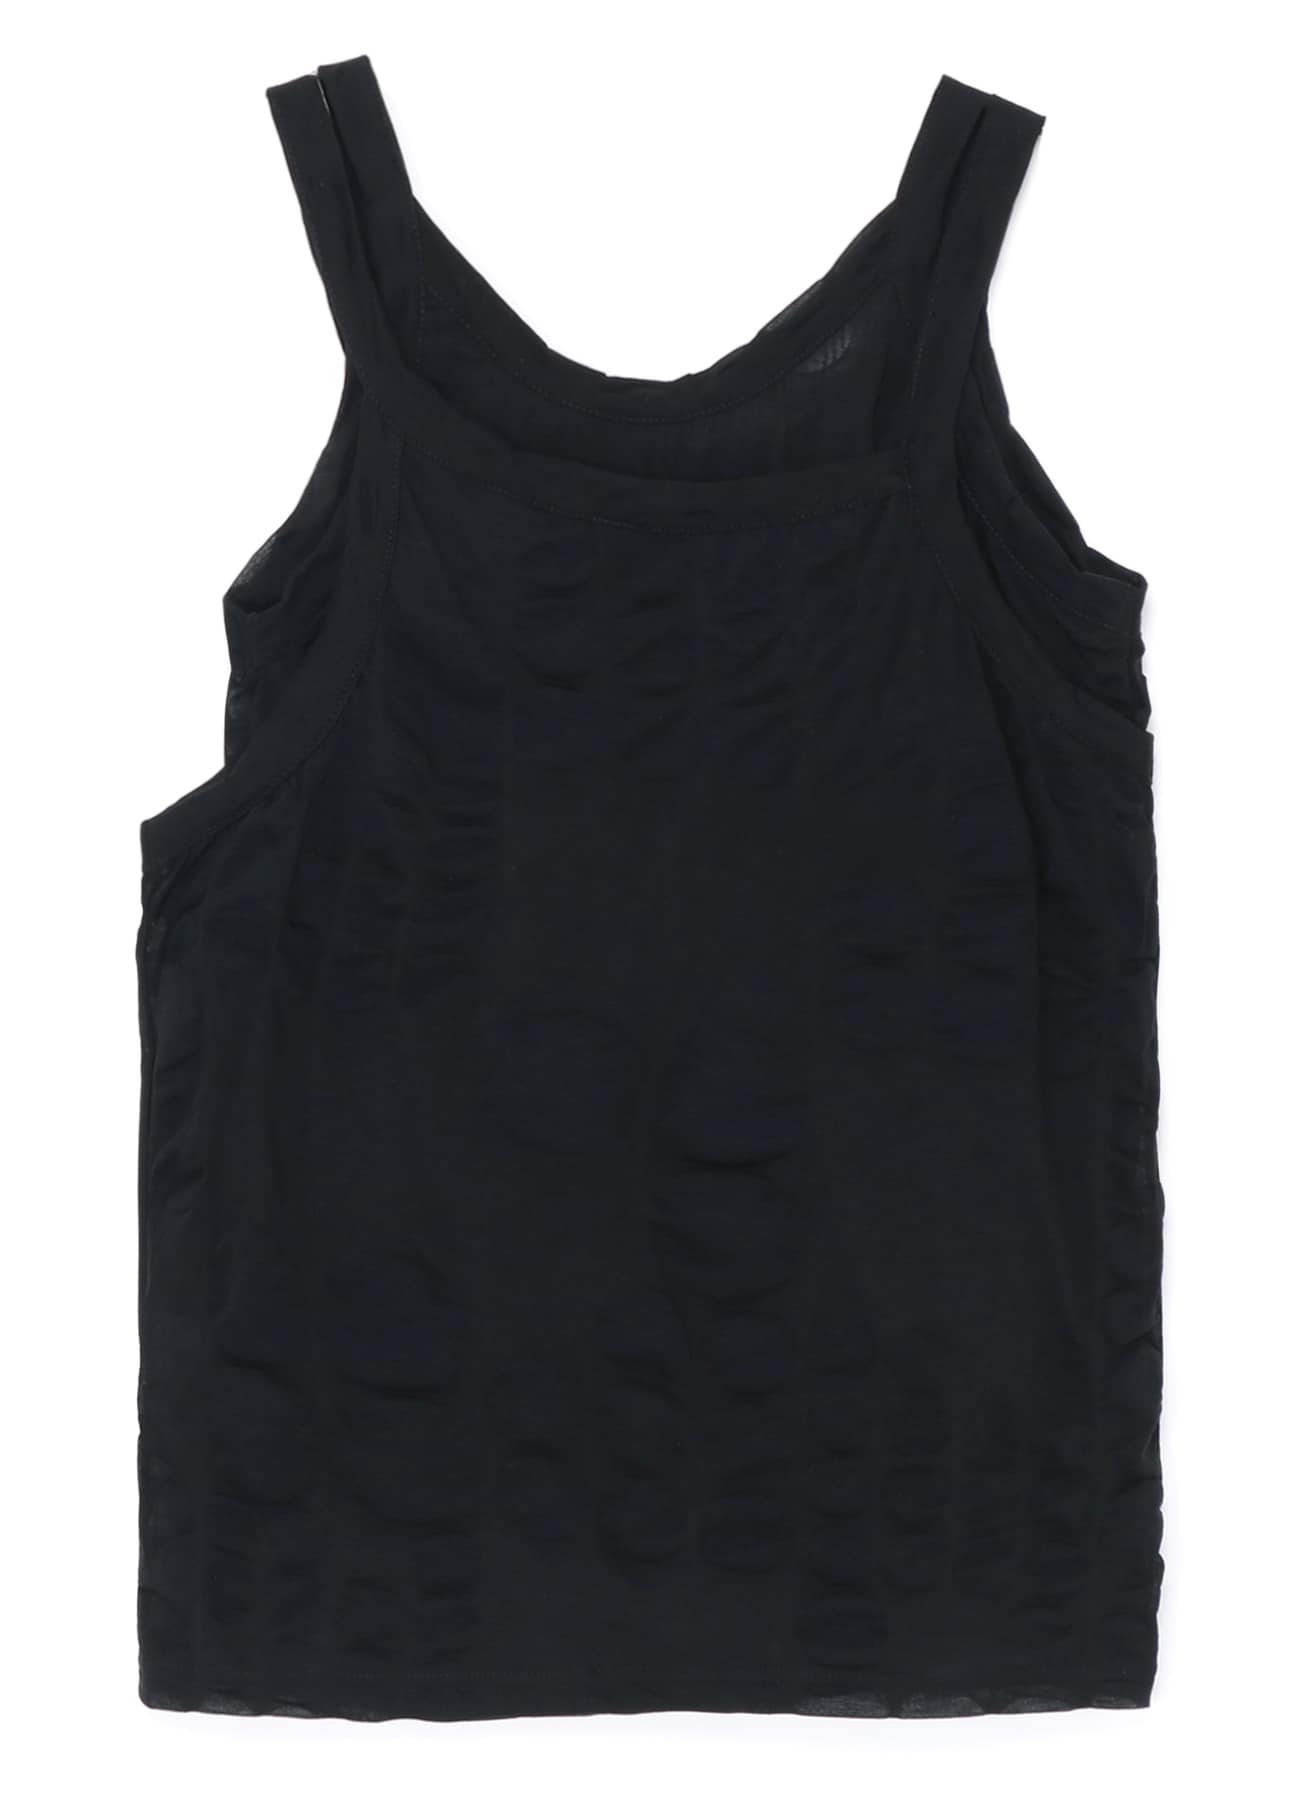 100/- COTTON DOUBLE LAYERED TANK TOP(S Black): Vintage 1.1｜THE